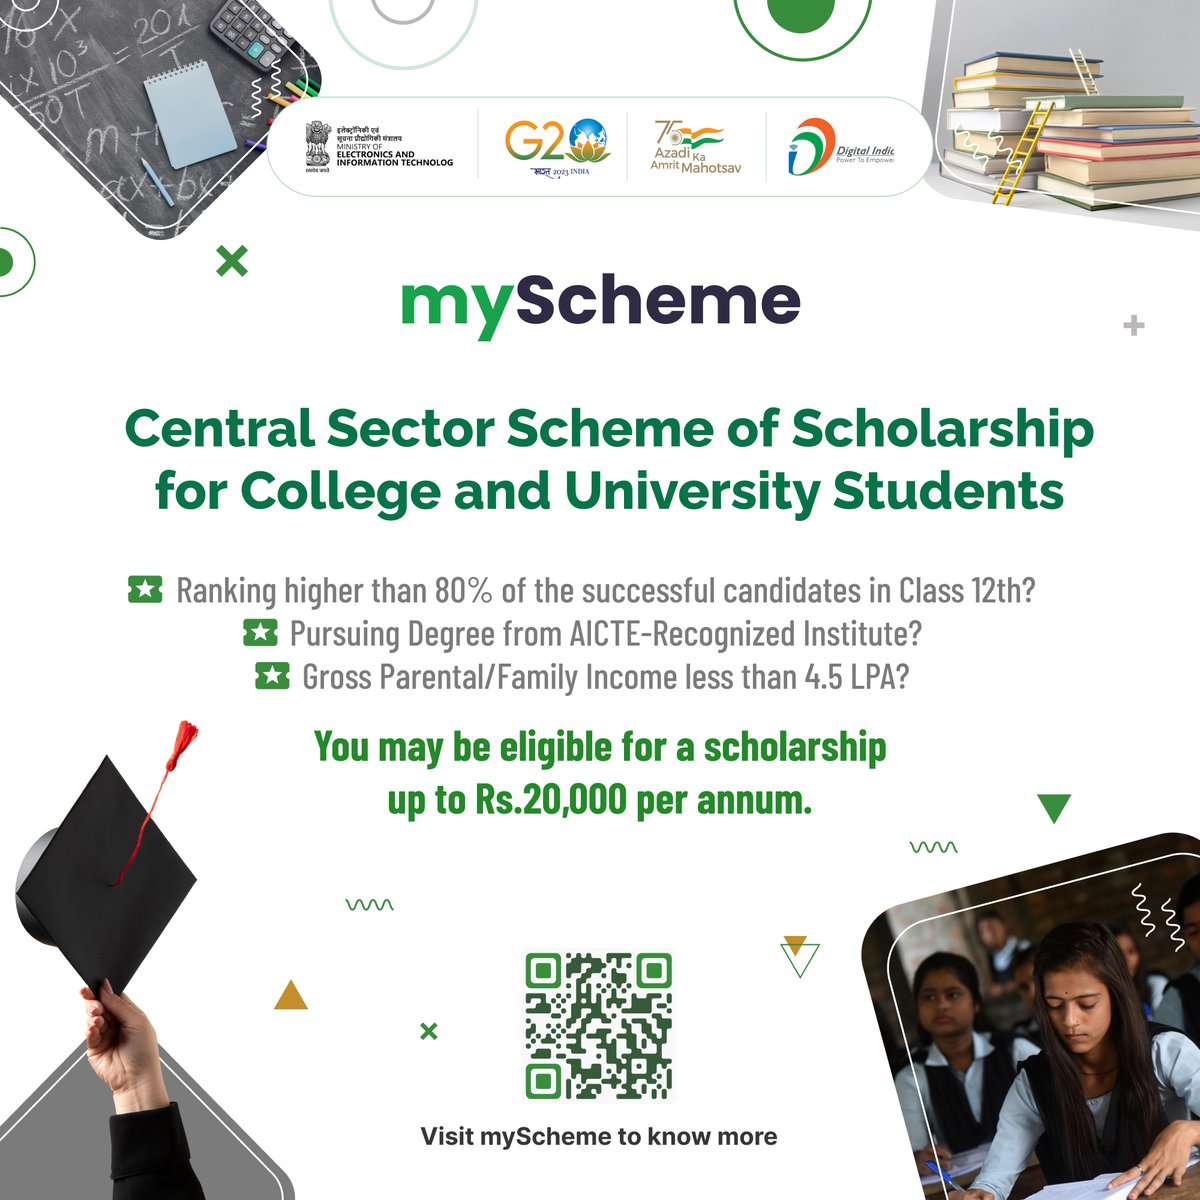 Are you looking for a scholarship while pursuing higher studies? If Yes, here is a scheme for you. To know more, Visit myscheme.gov.in/schemes/csss-c… #governmentschemes #schemesforyou #digitalindia #csss #myScheme #celebrating1yearofmyScheme #scholarship #students